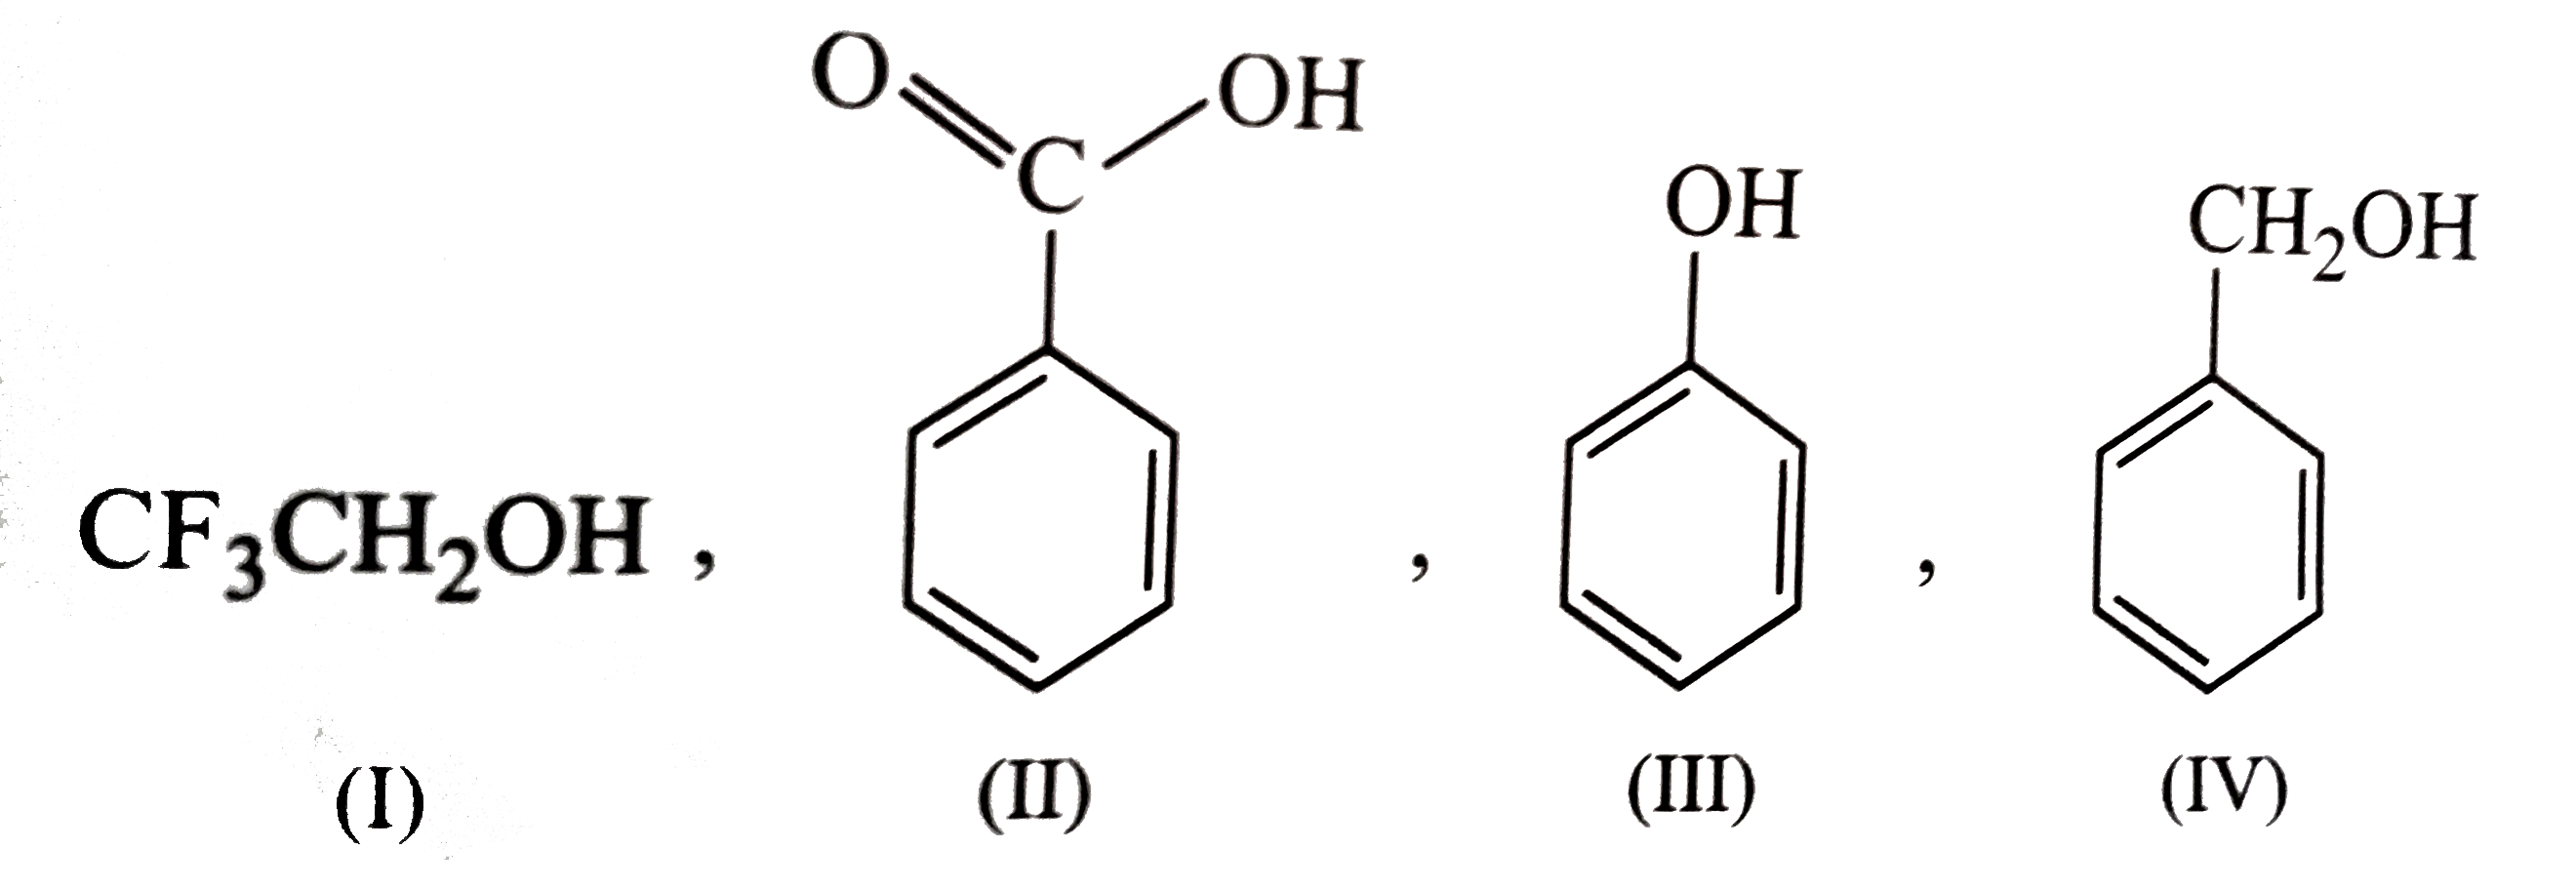 Which is the correct order of acidity from weakest to strongest acid for these compounds :